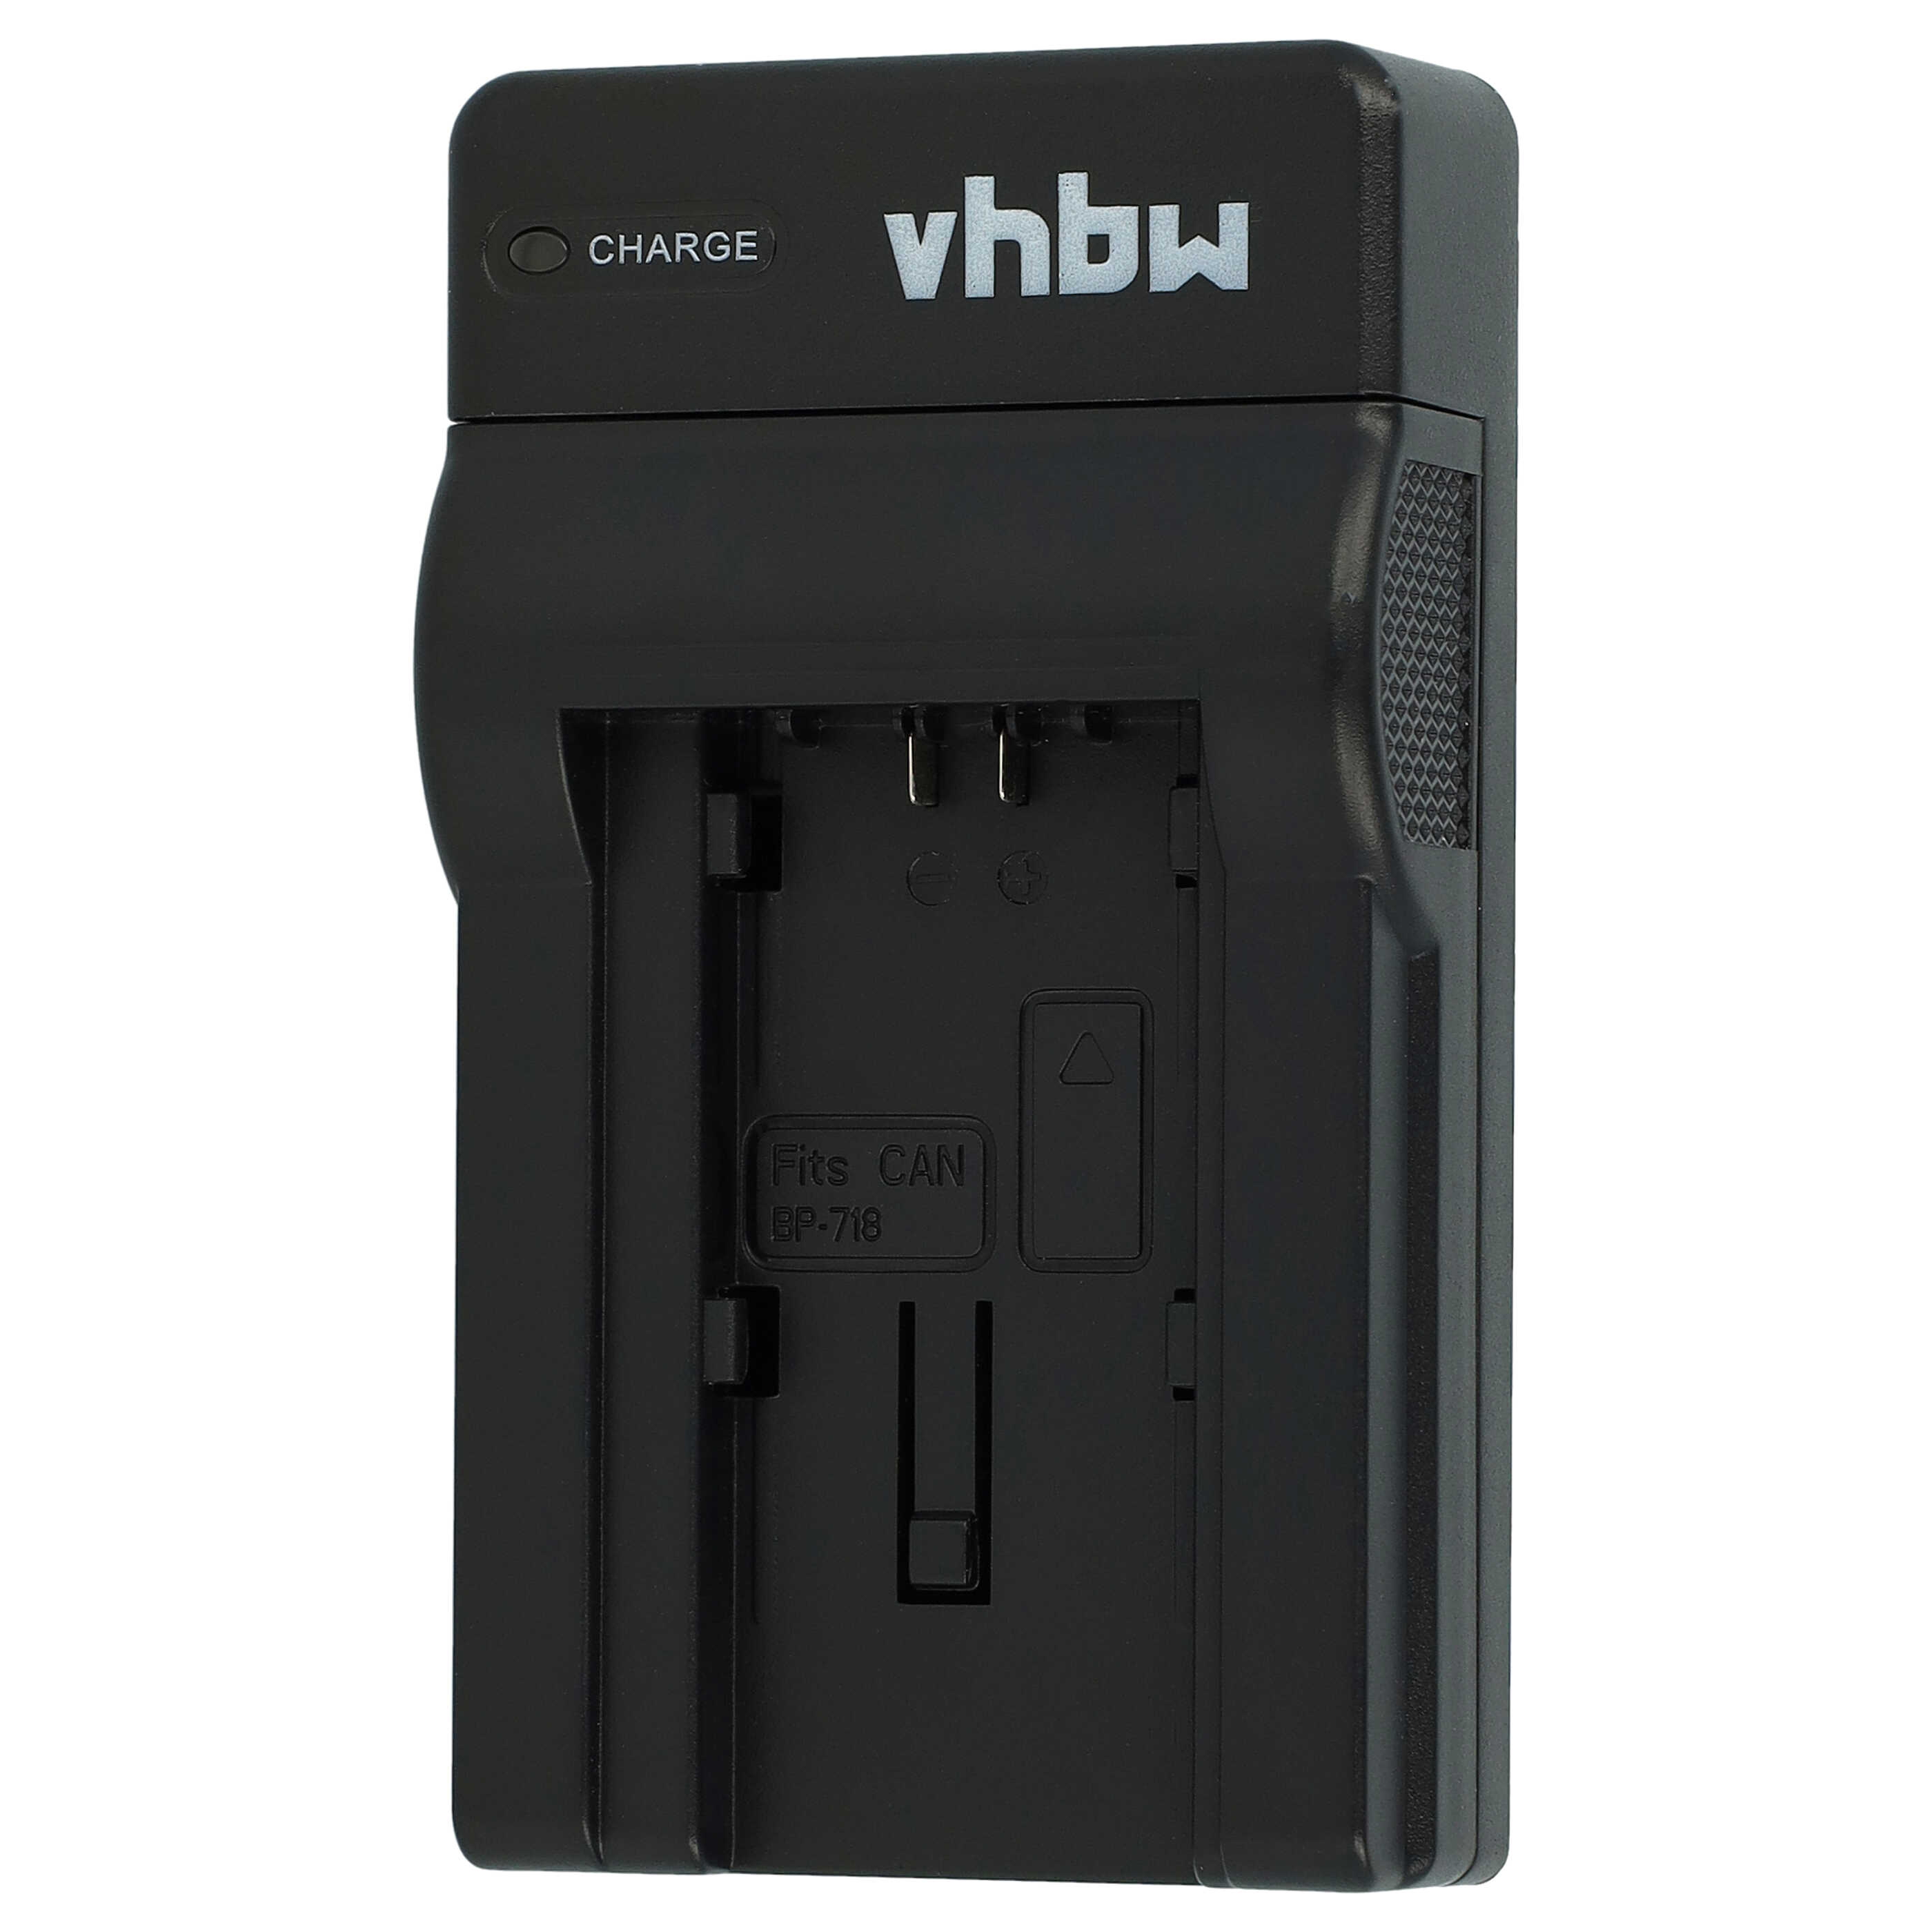 Battery Charger suitable for Canon BP-709 Camera etc. - 0.5 A, 4.2 V